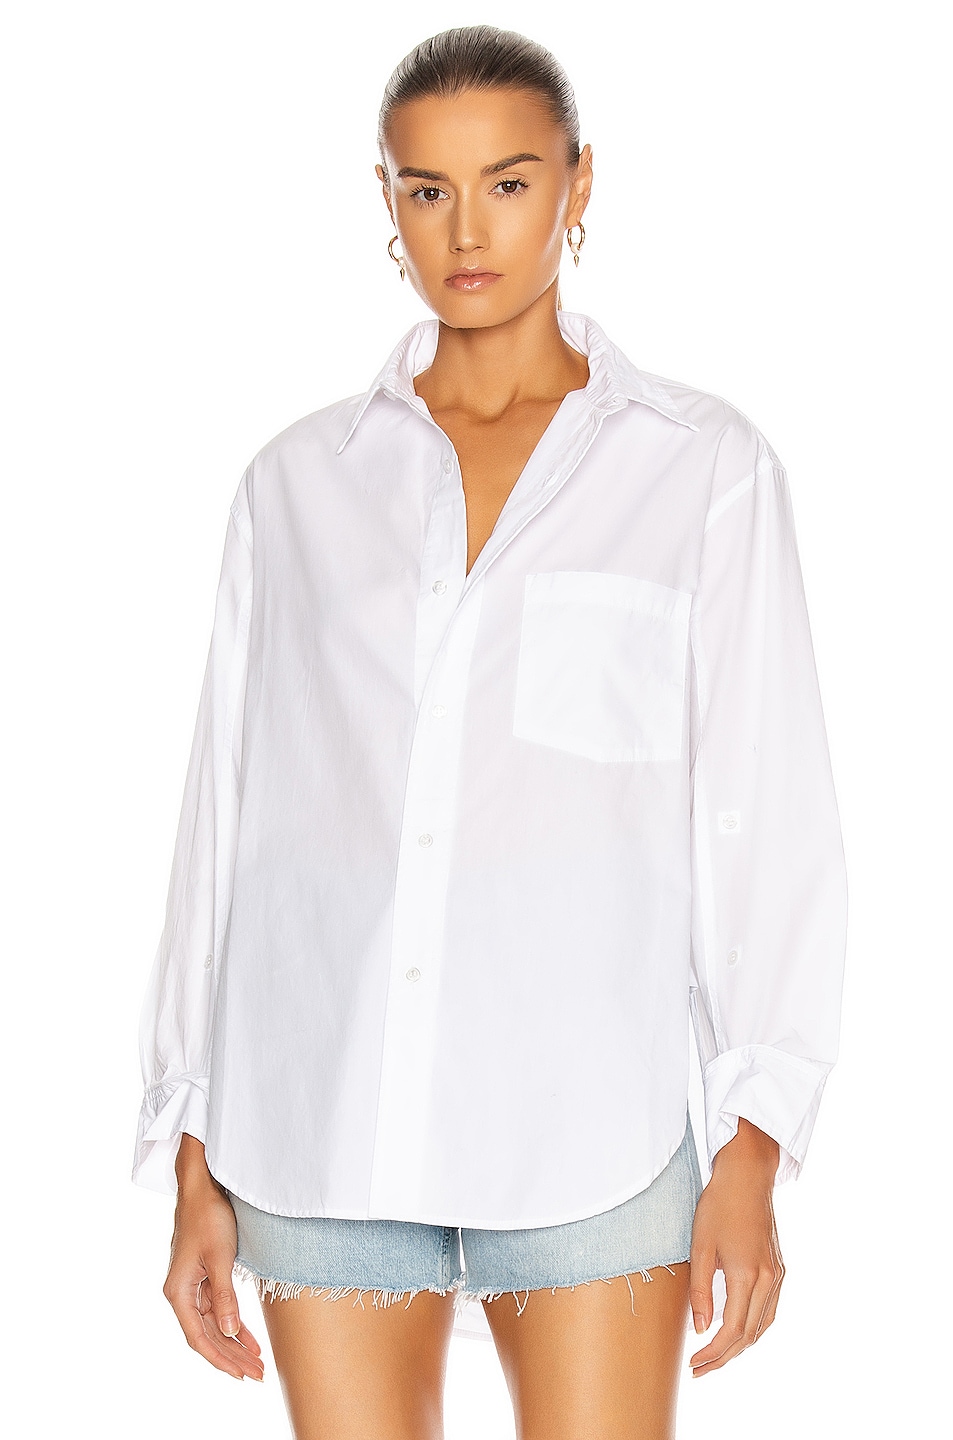 Citizens of Humanity Kayla Shirt in Optic White | FWRD